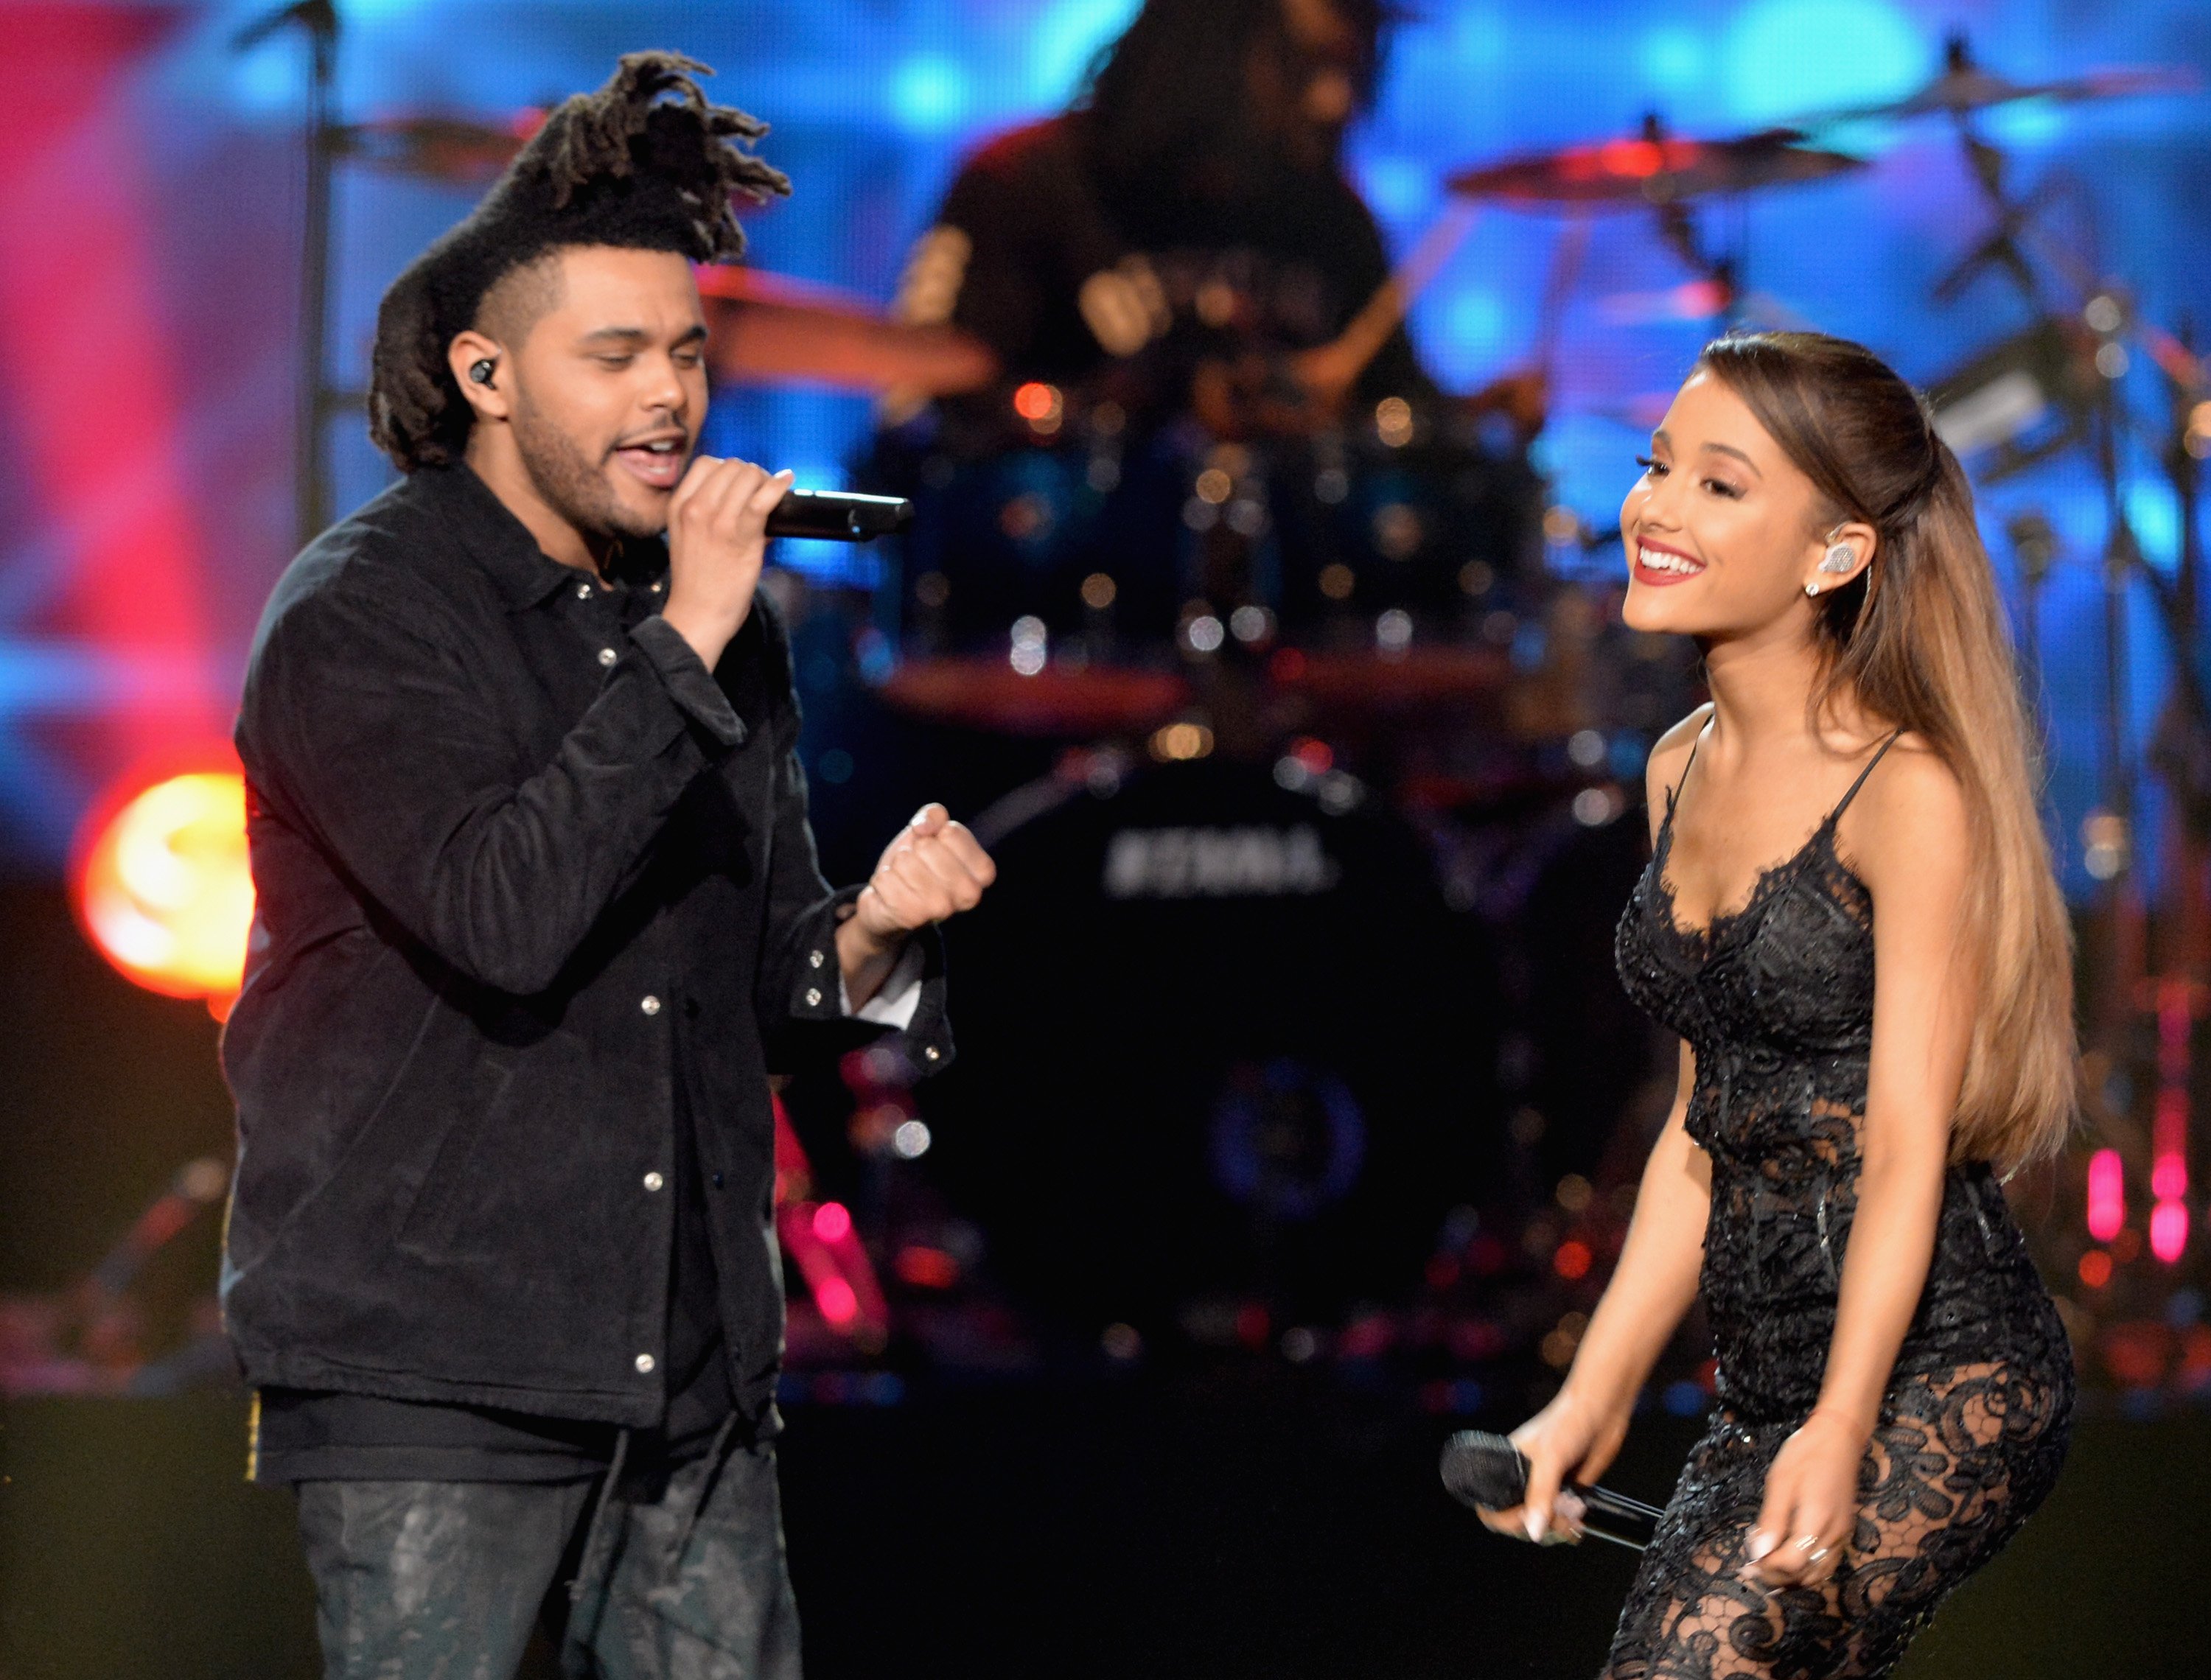 The Weeknd (L) and Ariana Grande perform onstage at the 2014 American Music Awards on November 23, 2014 in Los Angeles, California.